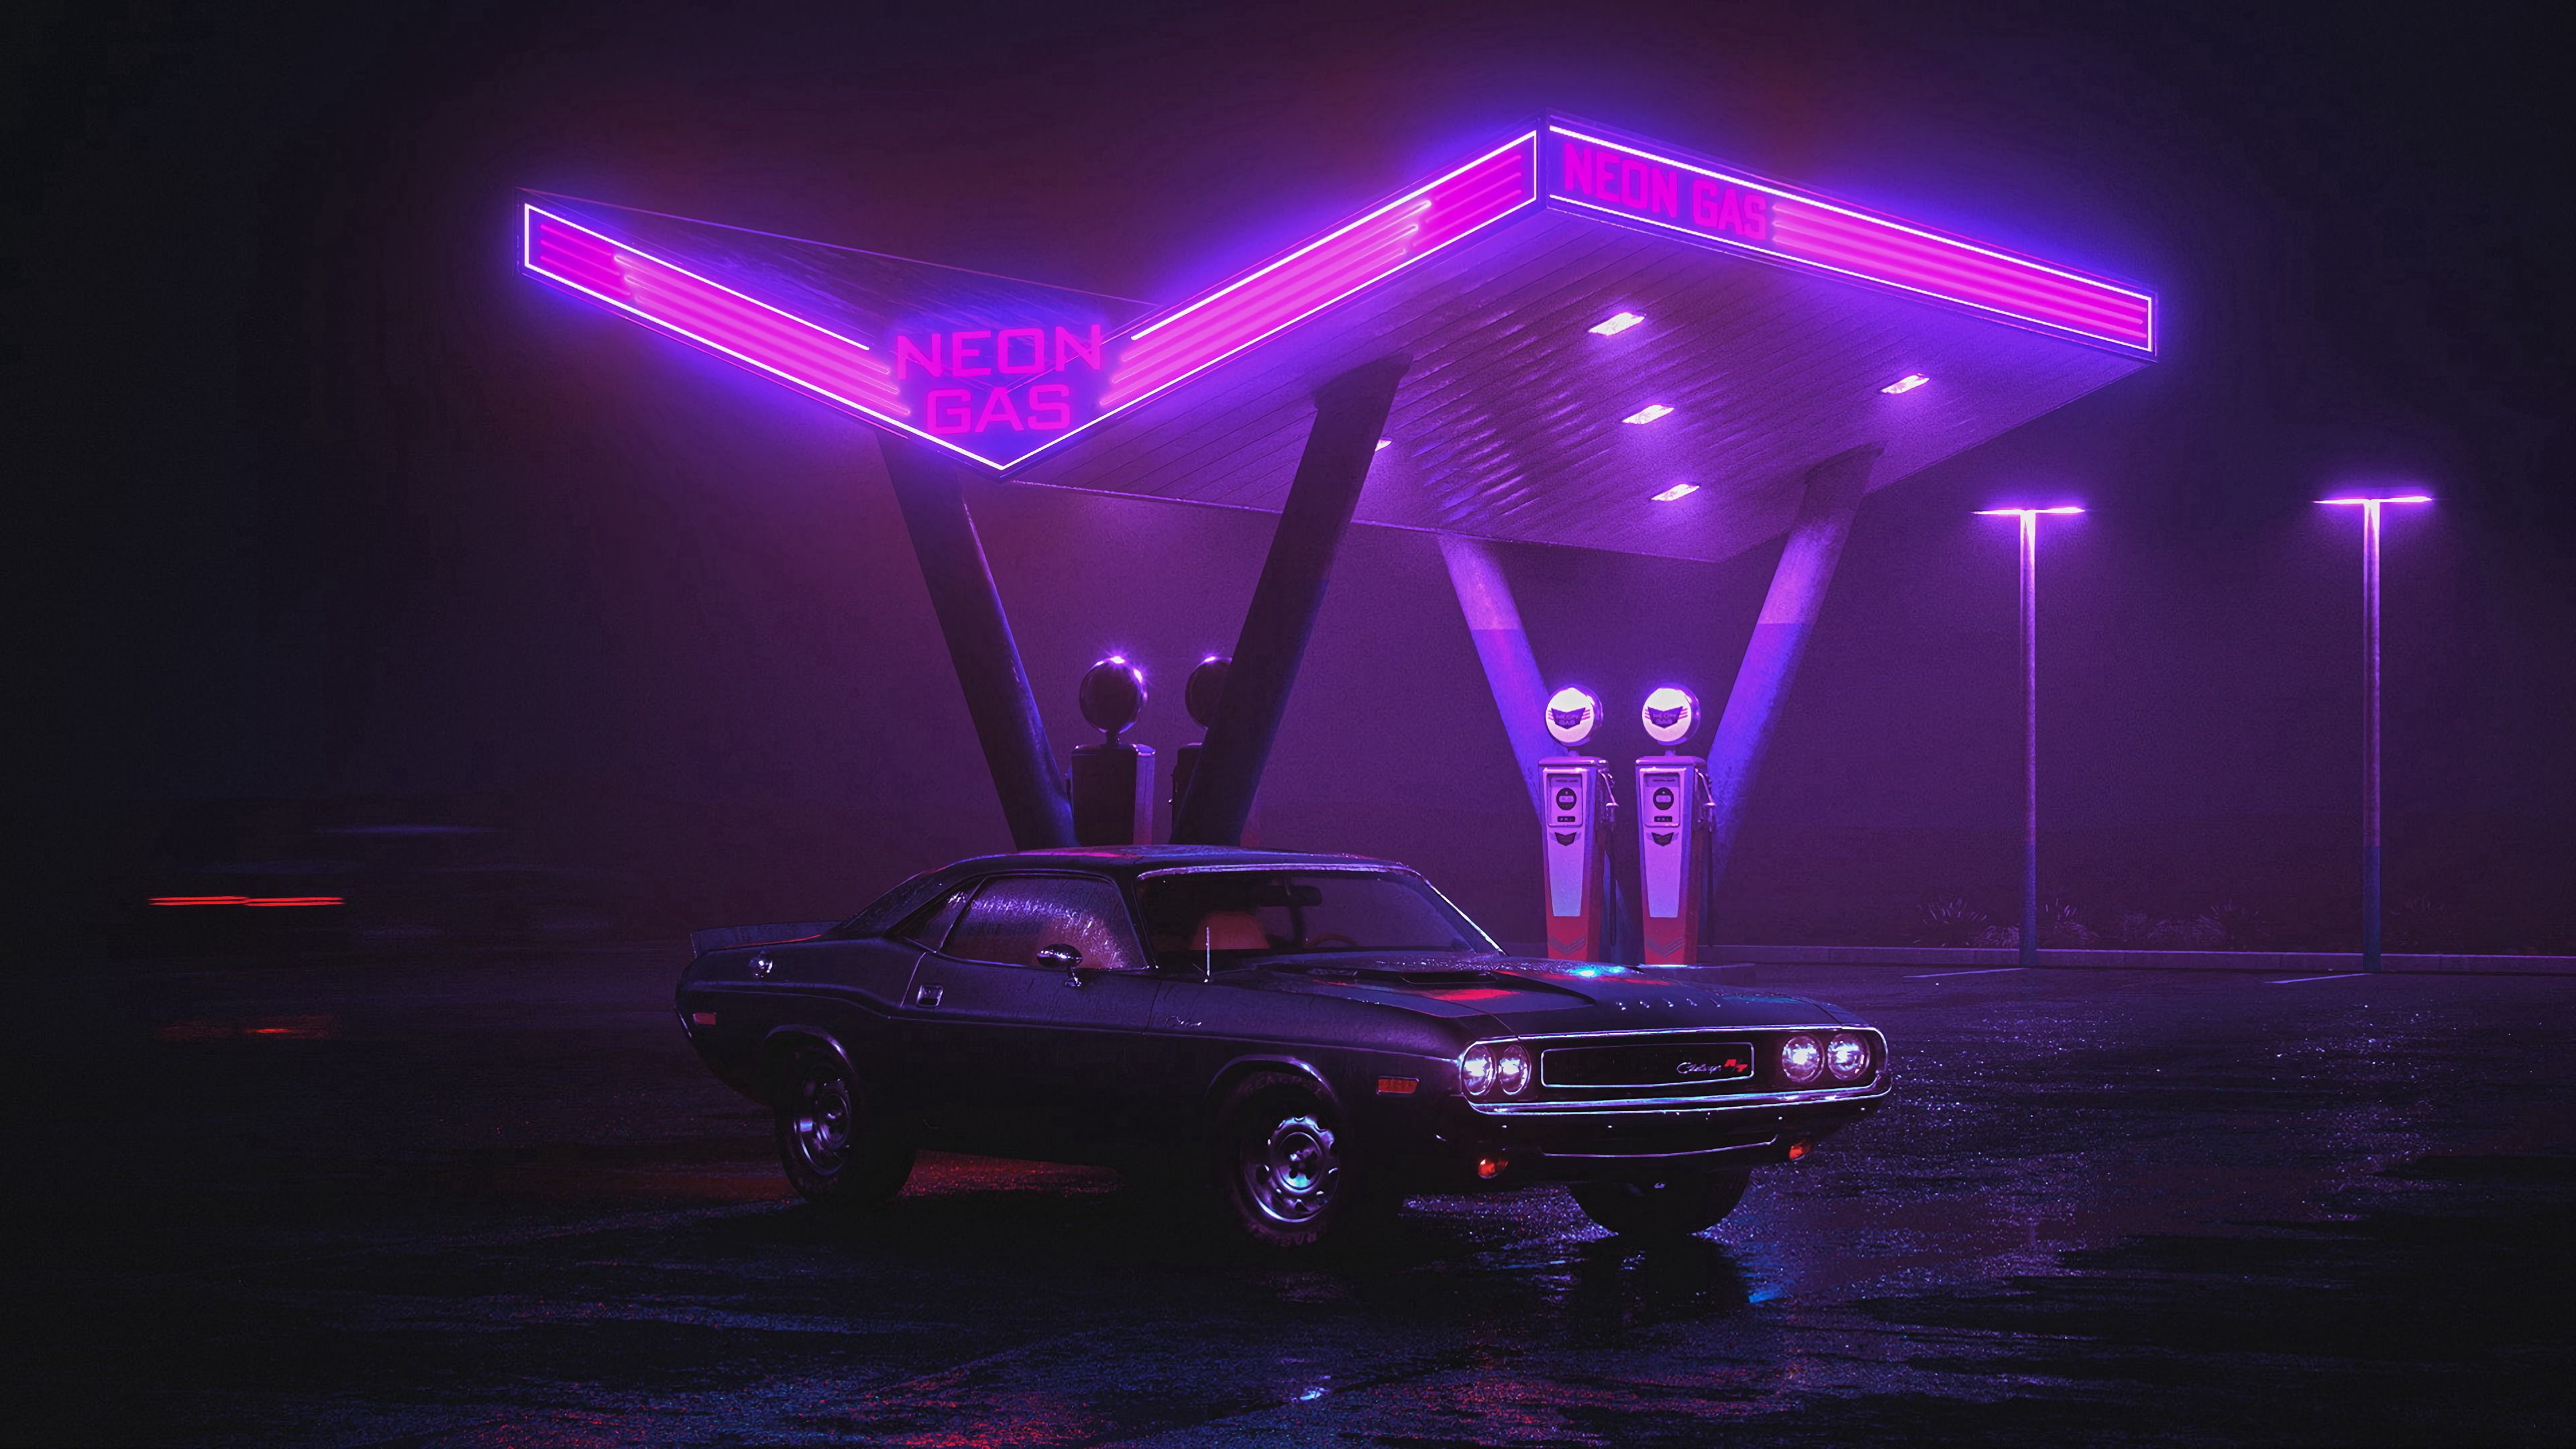 machine, neon, cars, night, car, old, refueling, filling